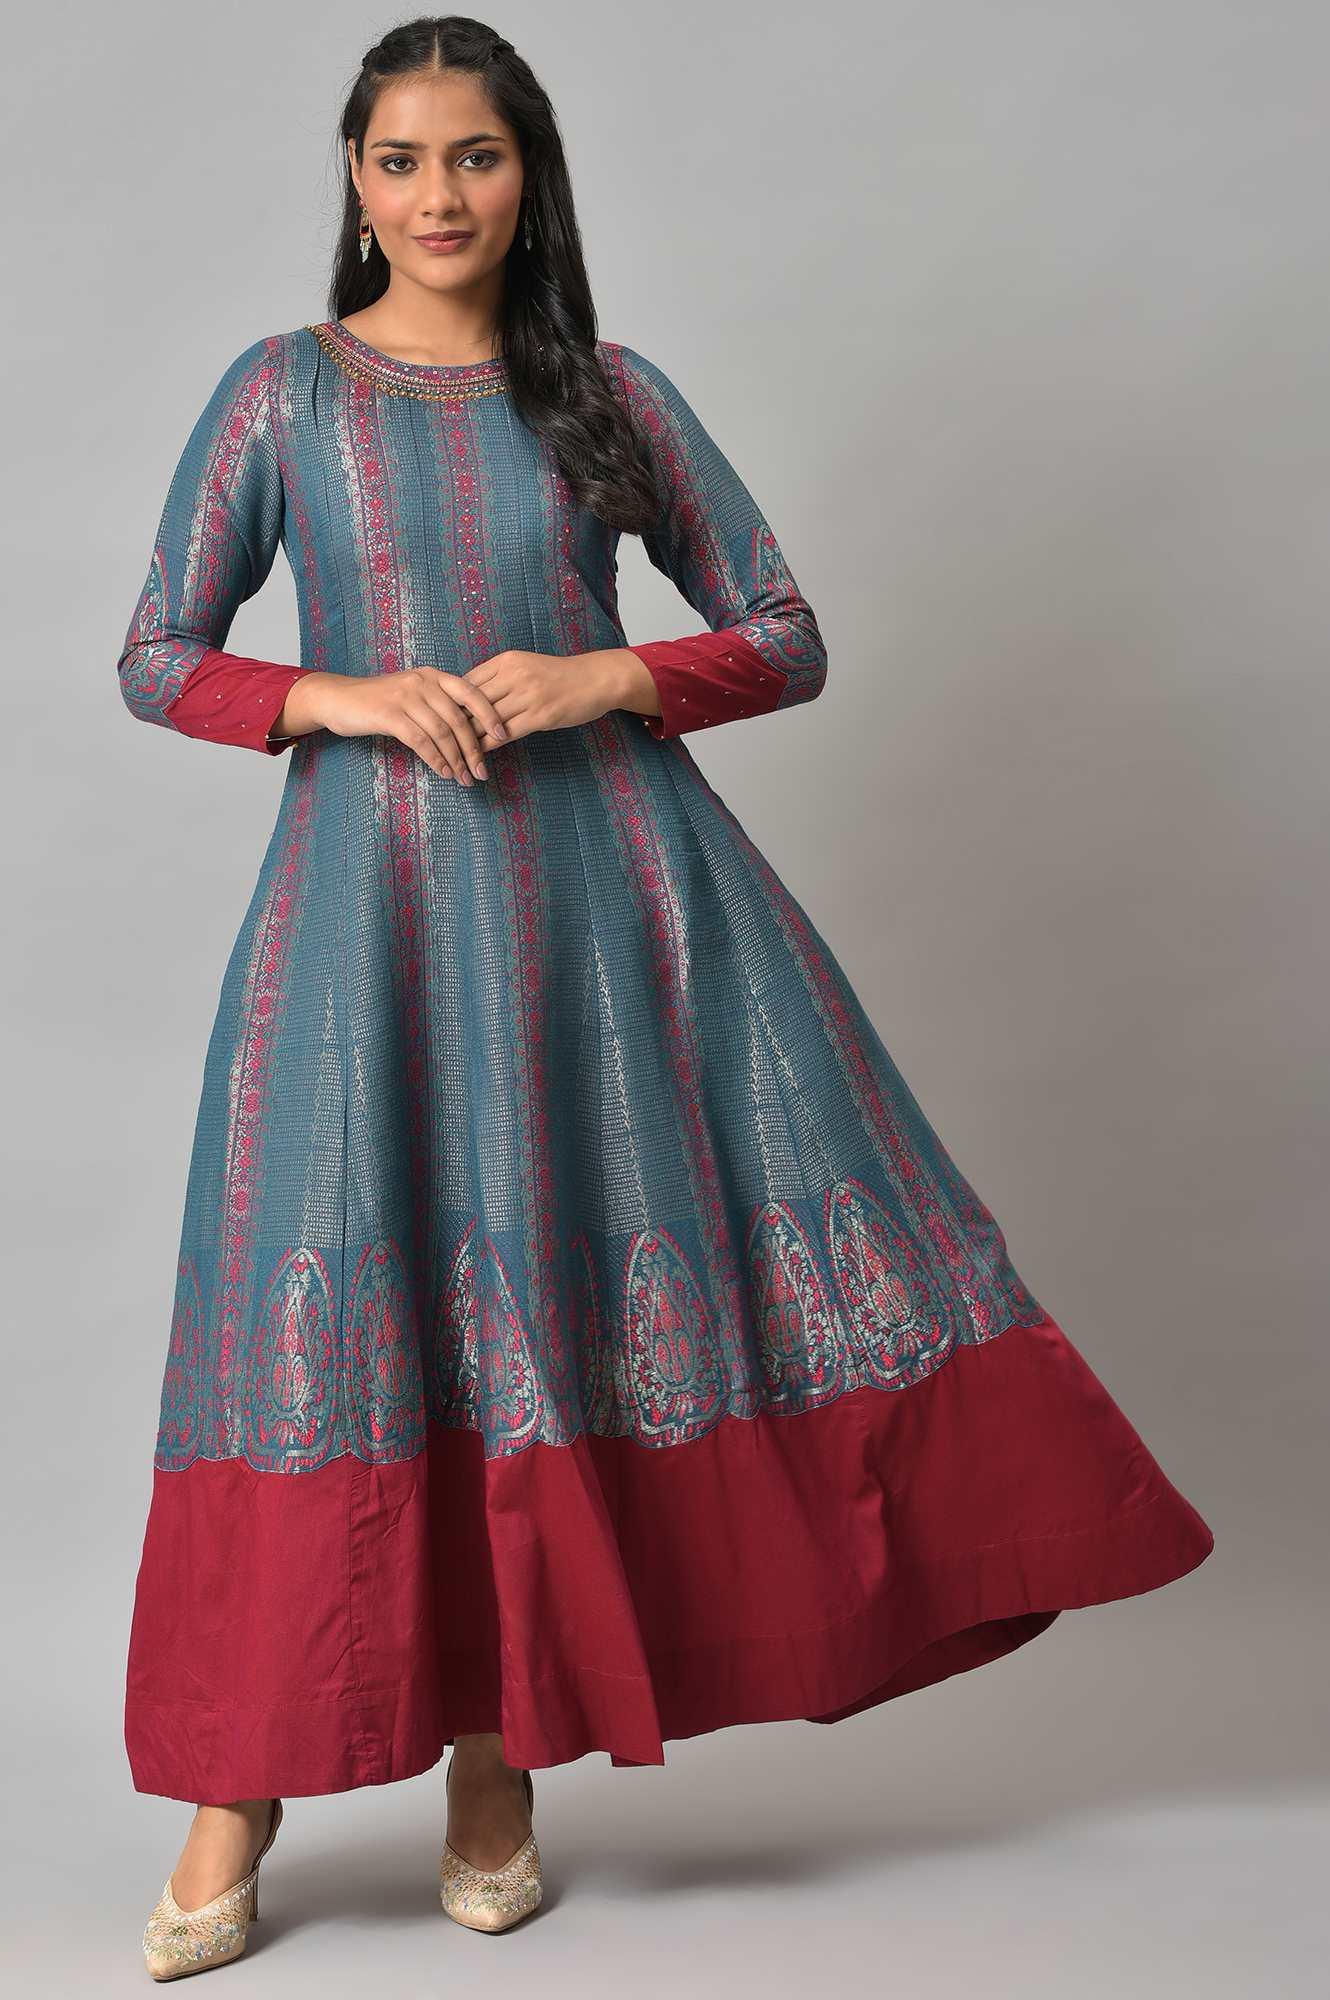 Teal And Pink Panelled Festive Winter Dress - wforwoman